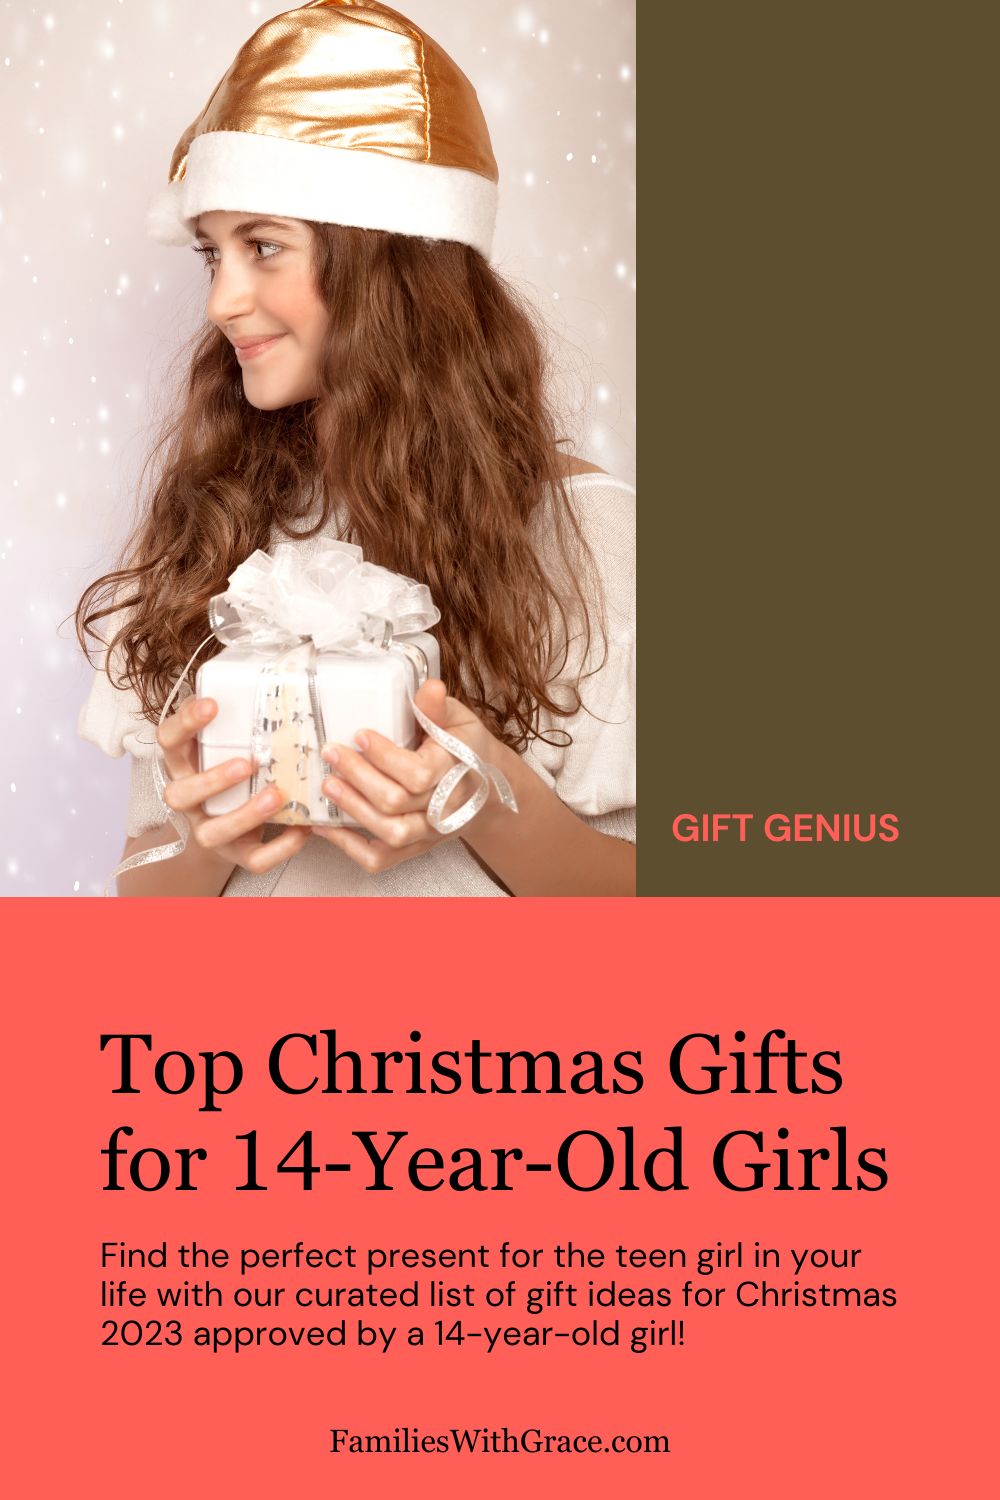 70 Best Gifts for Teens That Are Popular in 2023 | Teen Vogue